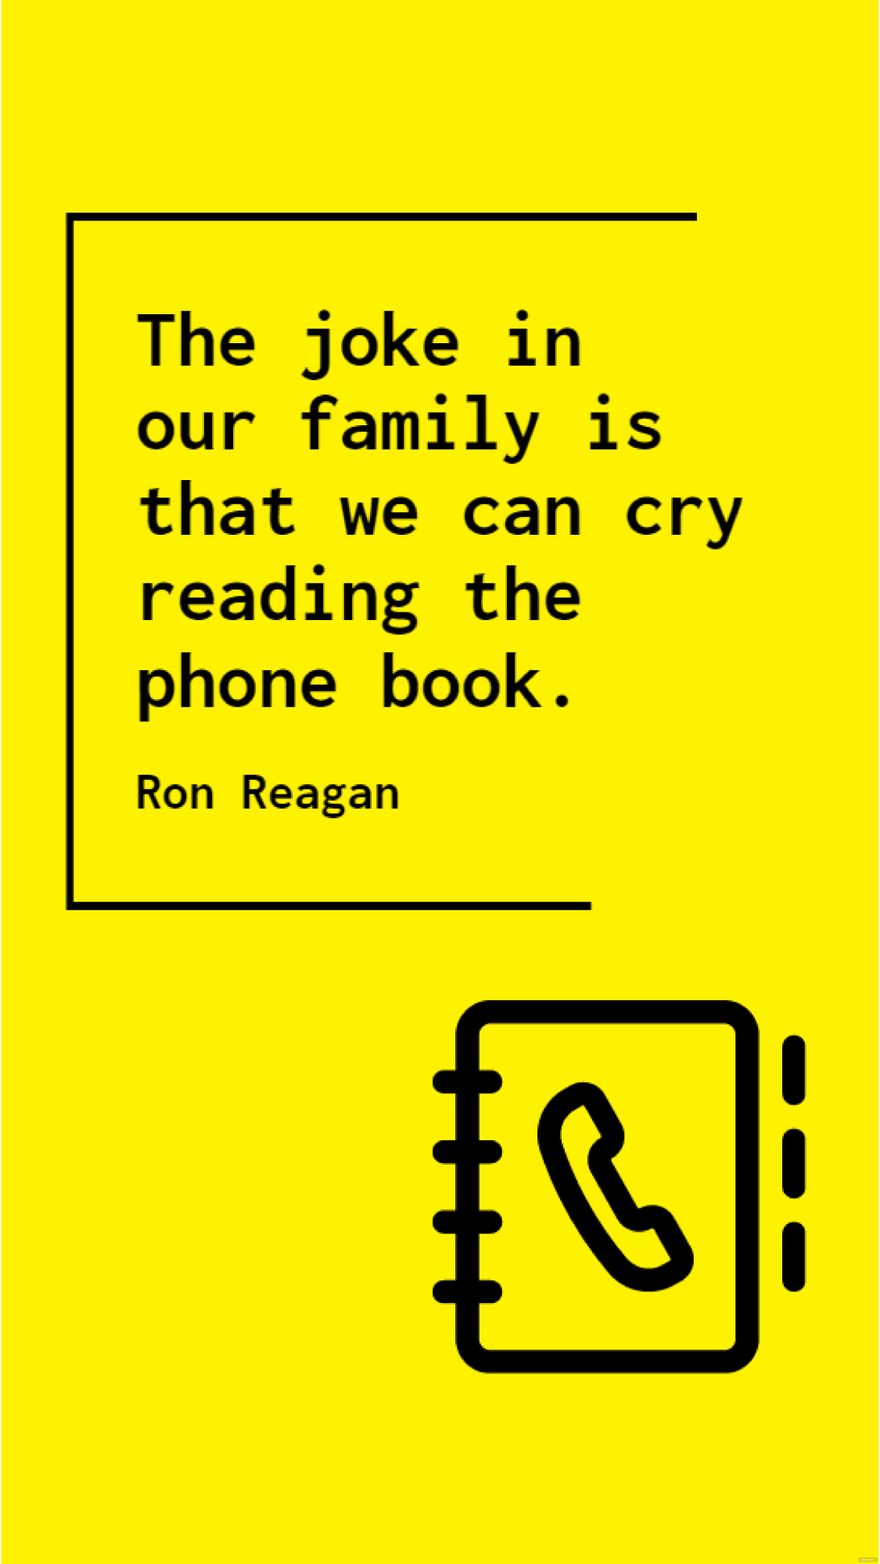 Free Ron Reagan - The joke in our family is that we can cry reading the phone book.